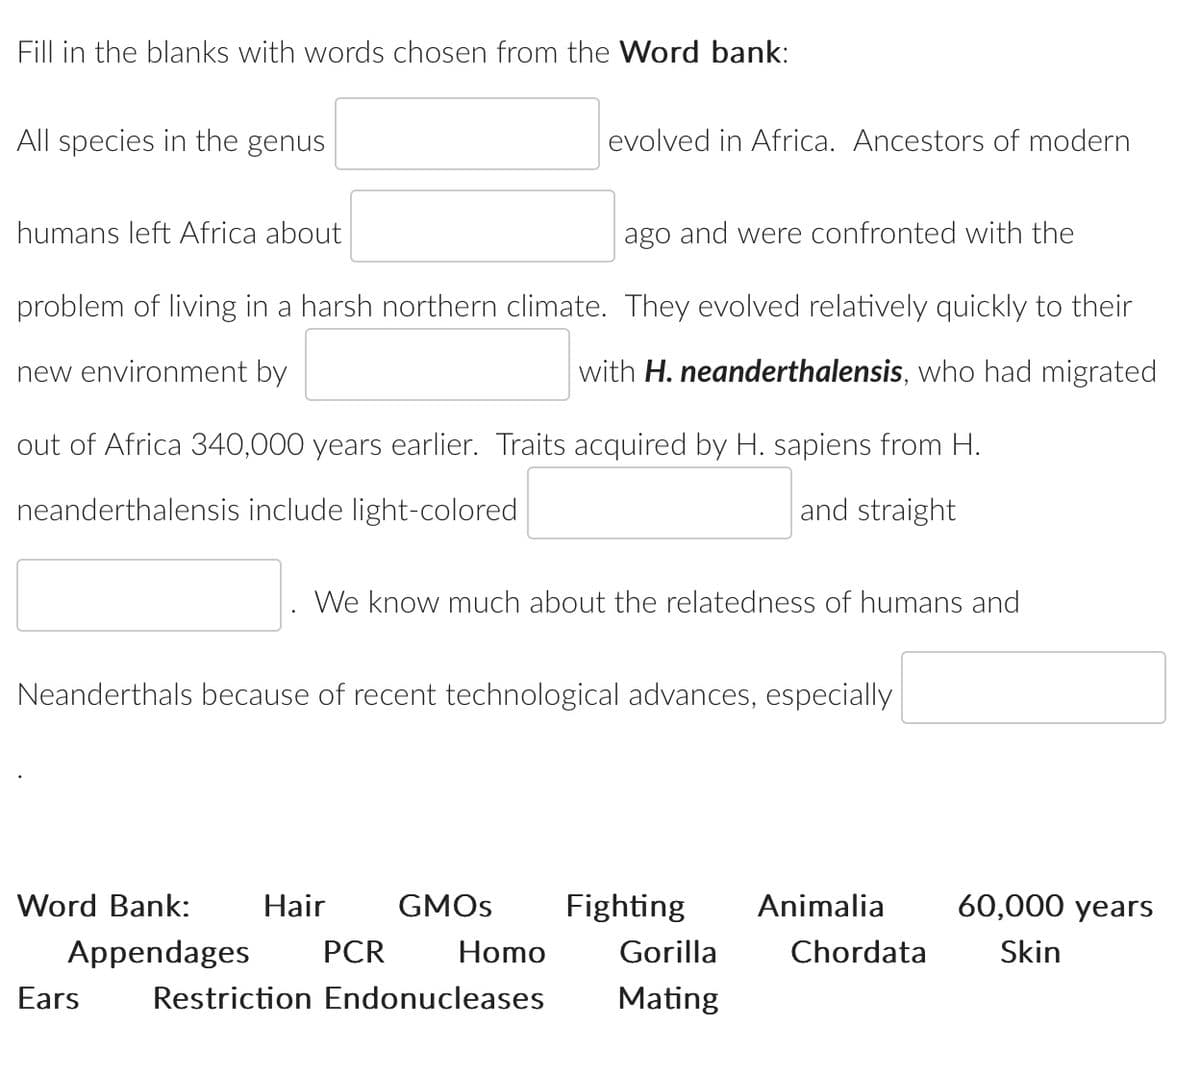 Fill in the blanks with words chosen from the Word bank:
All species in the genus
humans left Africa about
ago and were confronted with the
problem of living in a harsh northern climate. They evolved relatively quickly to their
with H. neanderthalensis, who had migrated
new environment by
out of Africa 340,000 years earlier. Traits acquired by H. sapiens from H.
neanderthalensis include light-colored
and straight
Word Bank:
Neanderthals because of recent technological advances, especially
Appendages
We know much about the relatedness of humans and
Hair
evolved in Africa. Ancestors of modern
PCR
GMOs
Homo
Ears Restriction Endonucleases
Fighting Animalia
Gorilla
Mating
Chordata
60,000 years
Skin